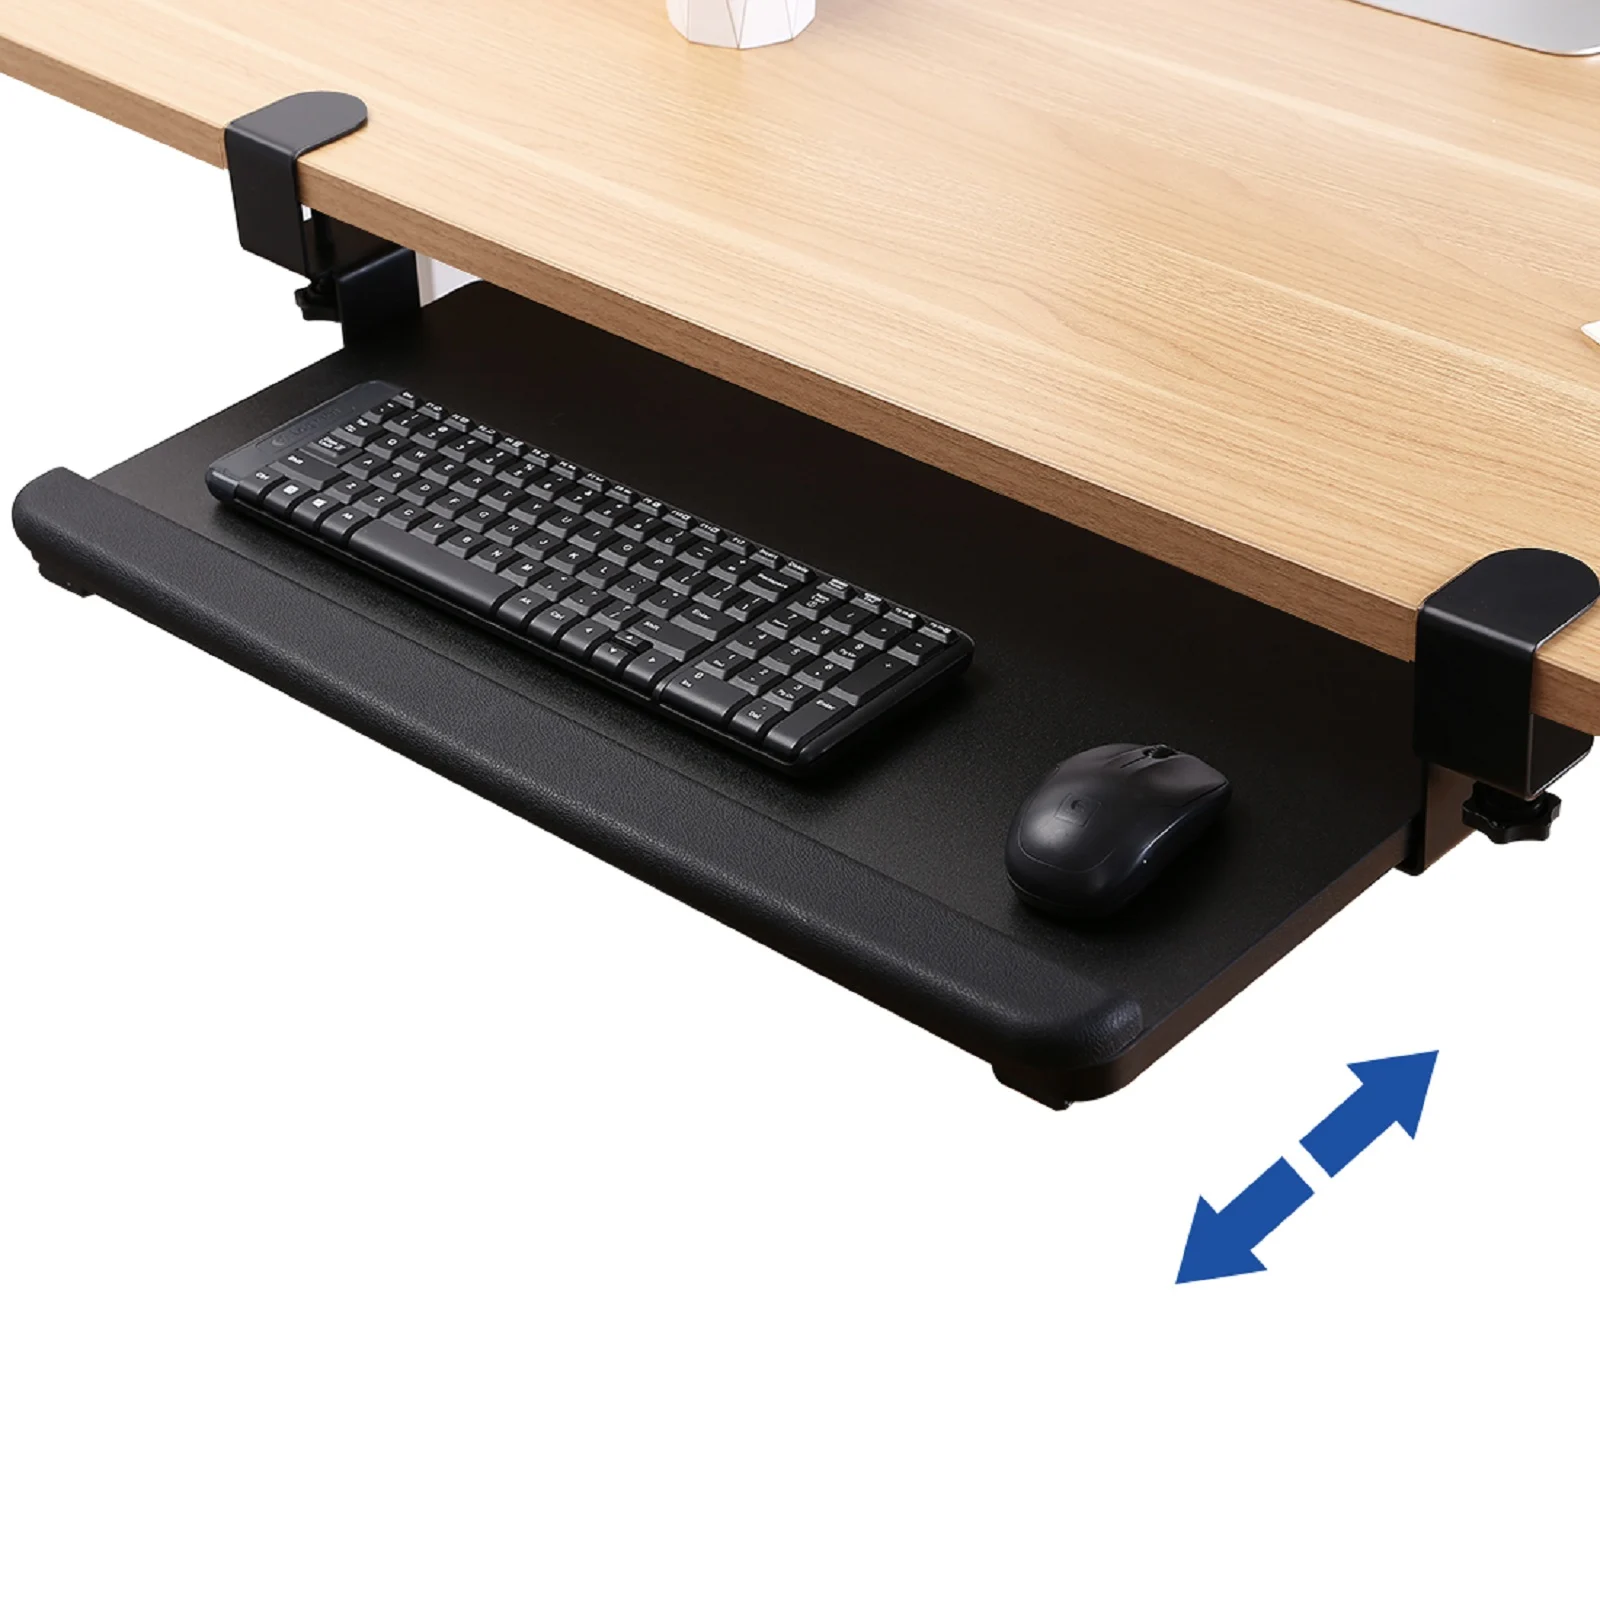 clamp on keyboard tray